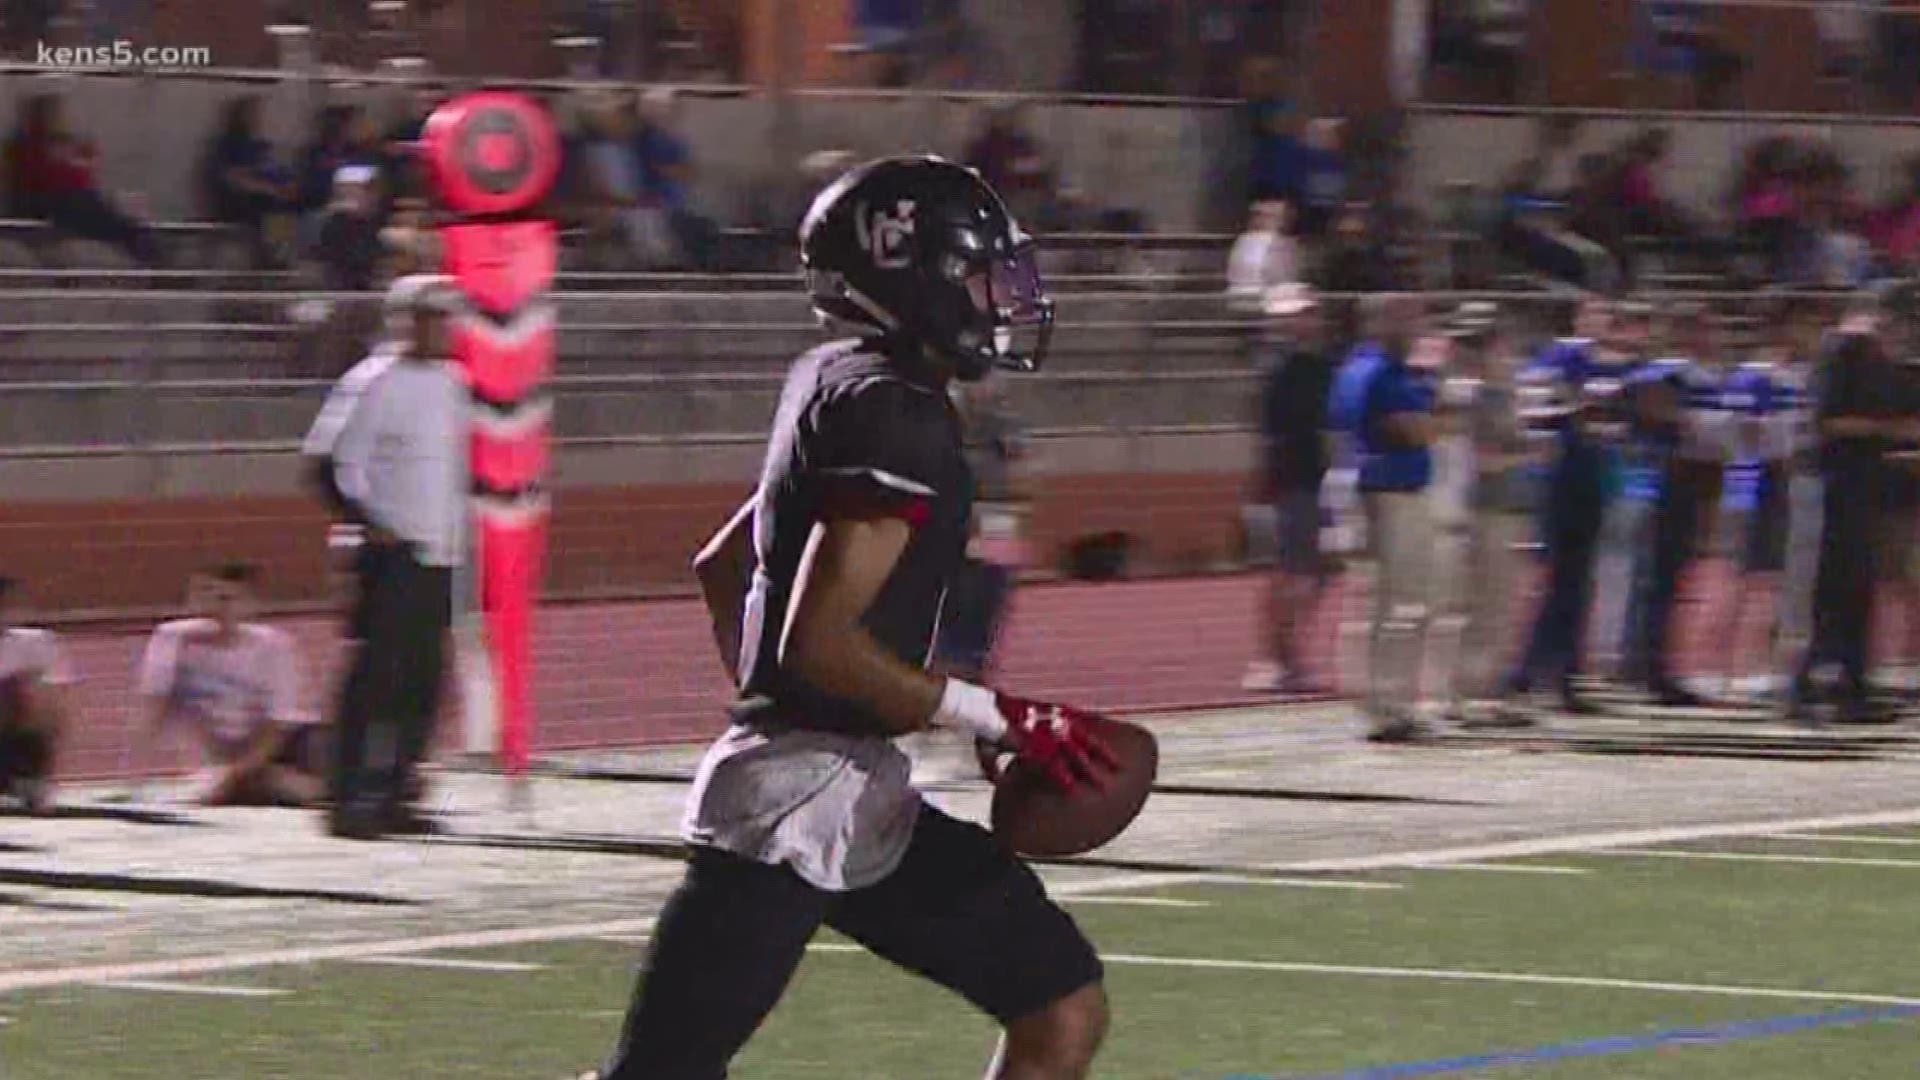 Steele managed a home win over New Braunfels, and the matchup between Jay and Stevens was an instant classic.